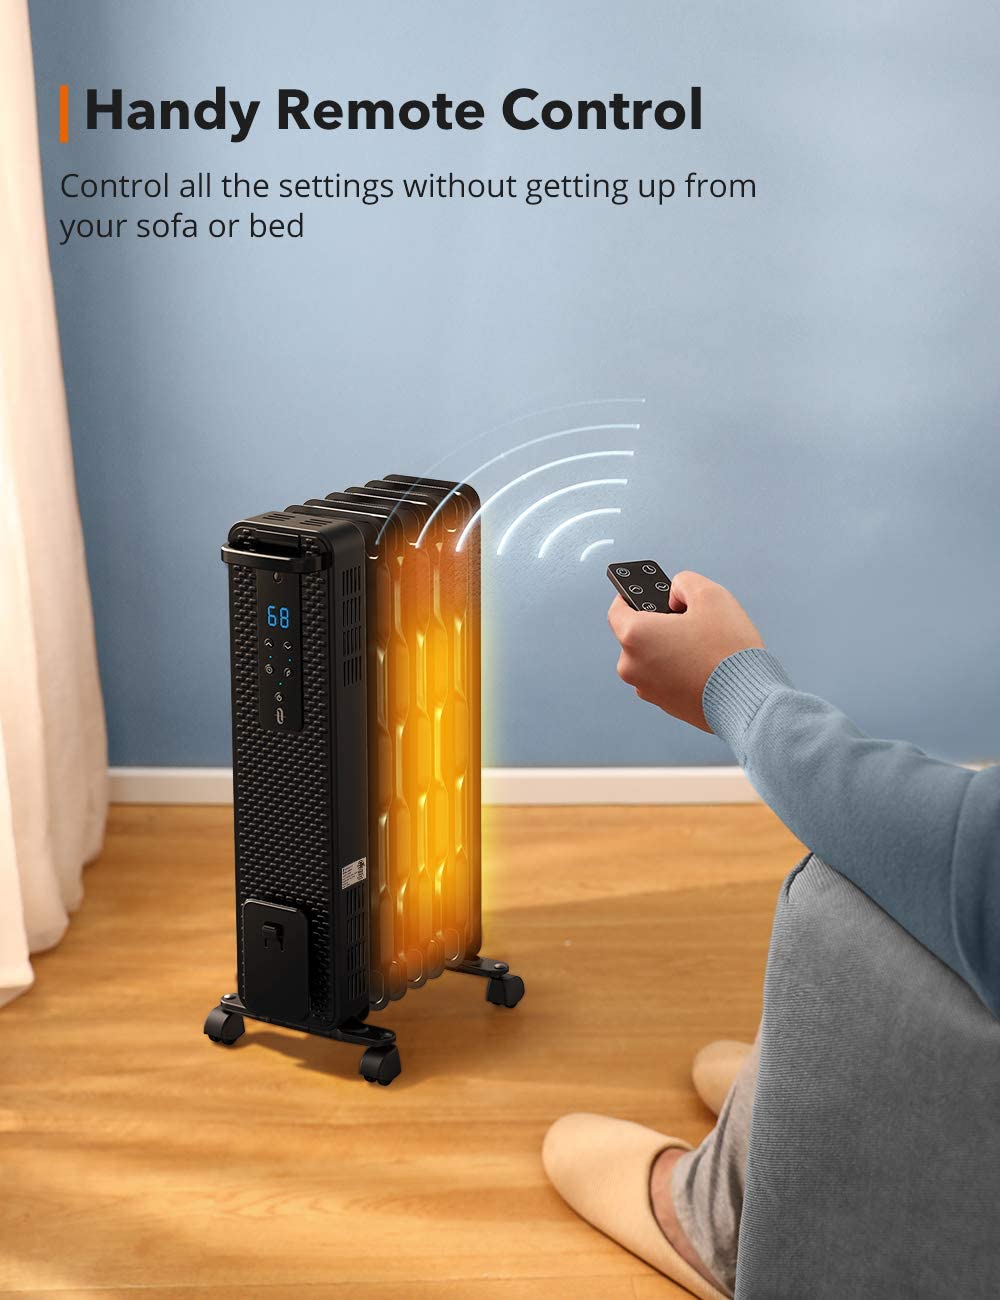 Space Heater 005 1500W Oil Filled Radiator Heaters with 3 Heating Mode-TaoTronics